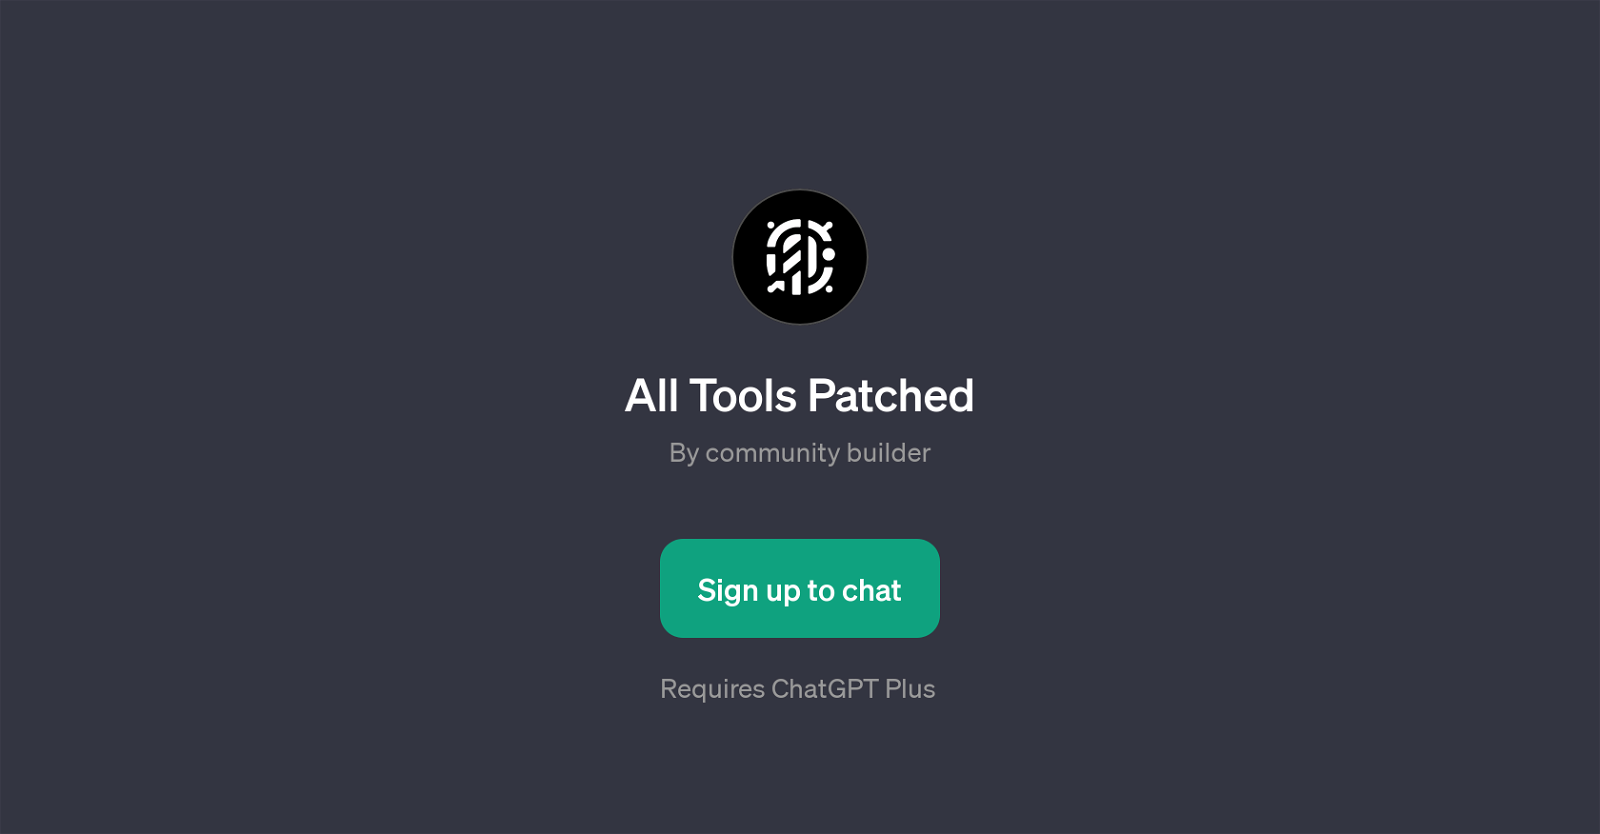 All Tools Patched website